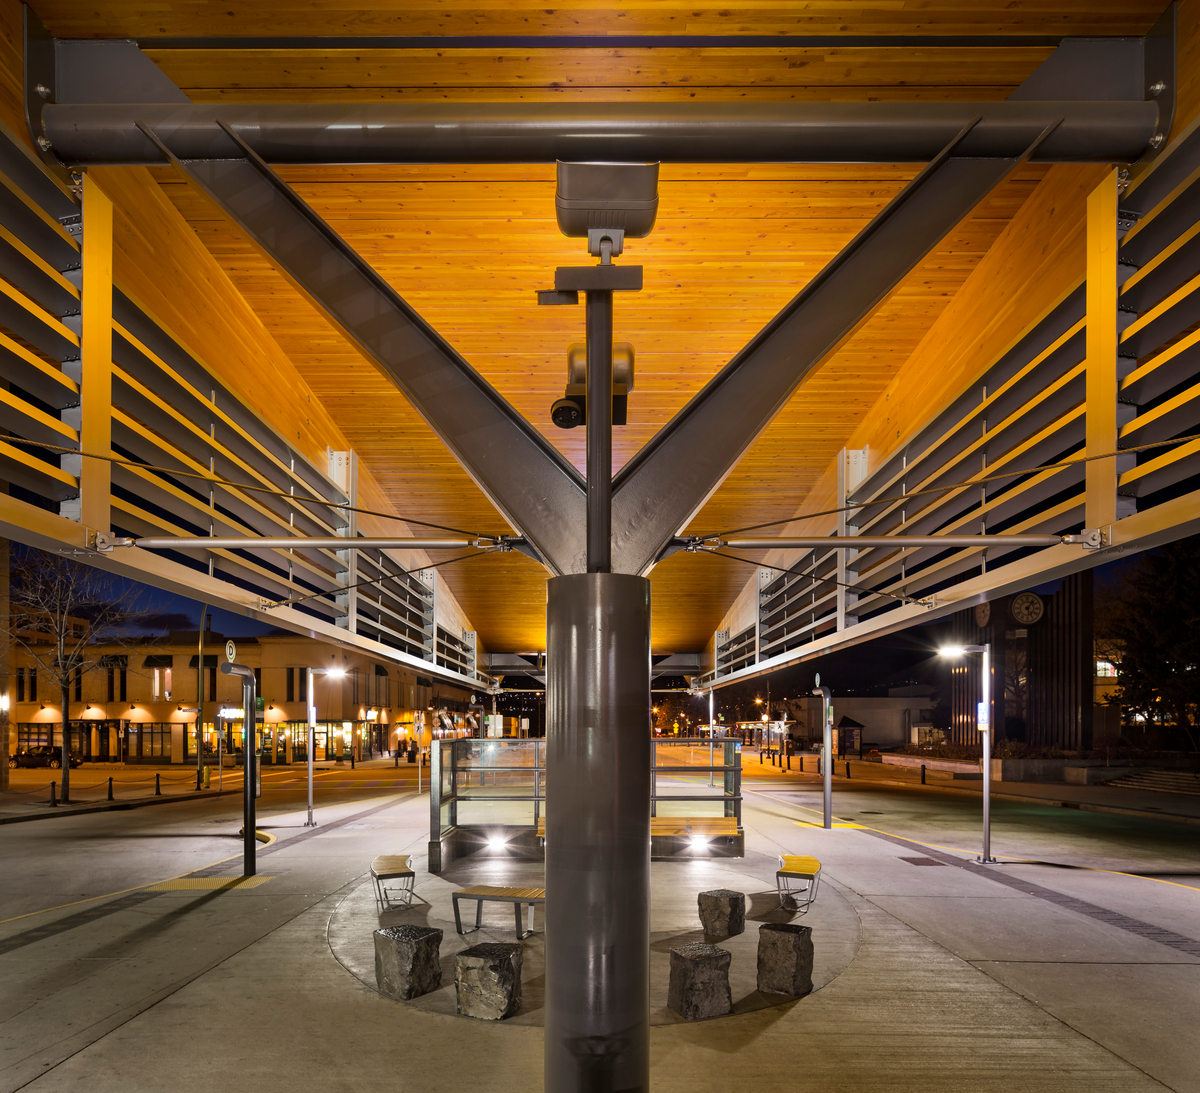 Nighttime outdoor close up view of steel column which supports 60-metre-long curvilinear roof span is achieved through the use of two engineered glue-laminated timber (glulam) beams supporting nine-metre-wide decking panels